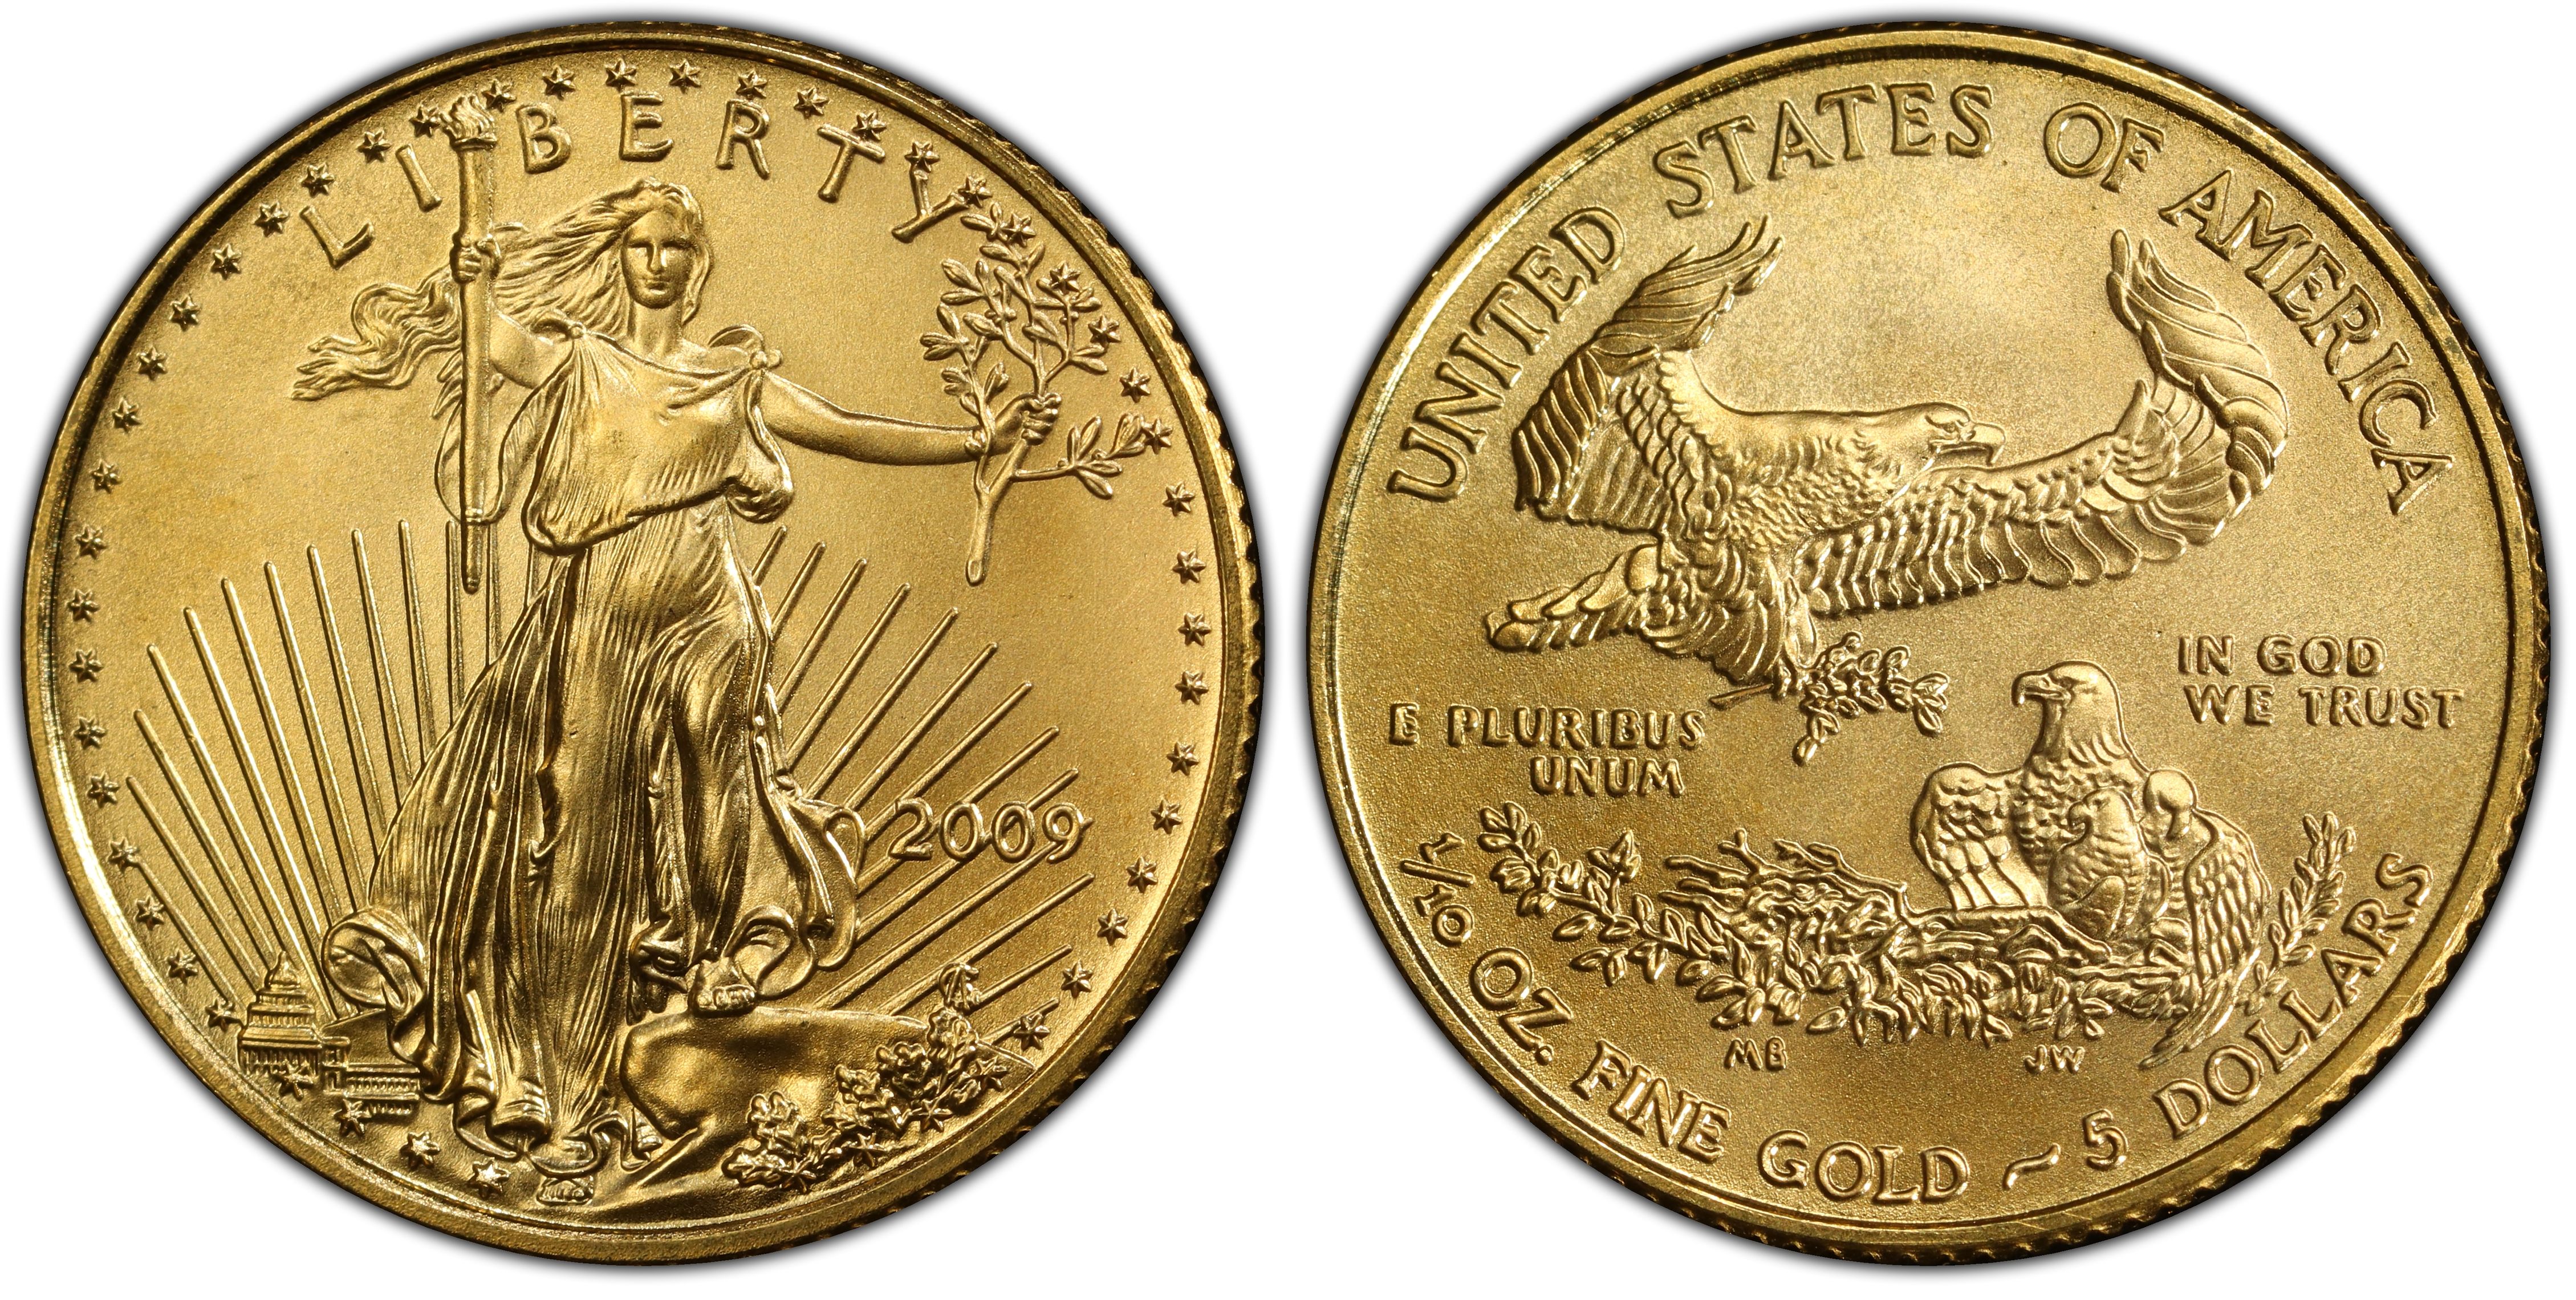 2009 $5 Gold Eagle (Regular Strike) Gold Eagles - PCGS CoinFacts